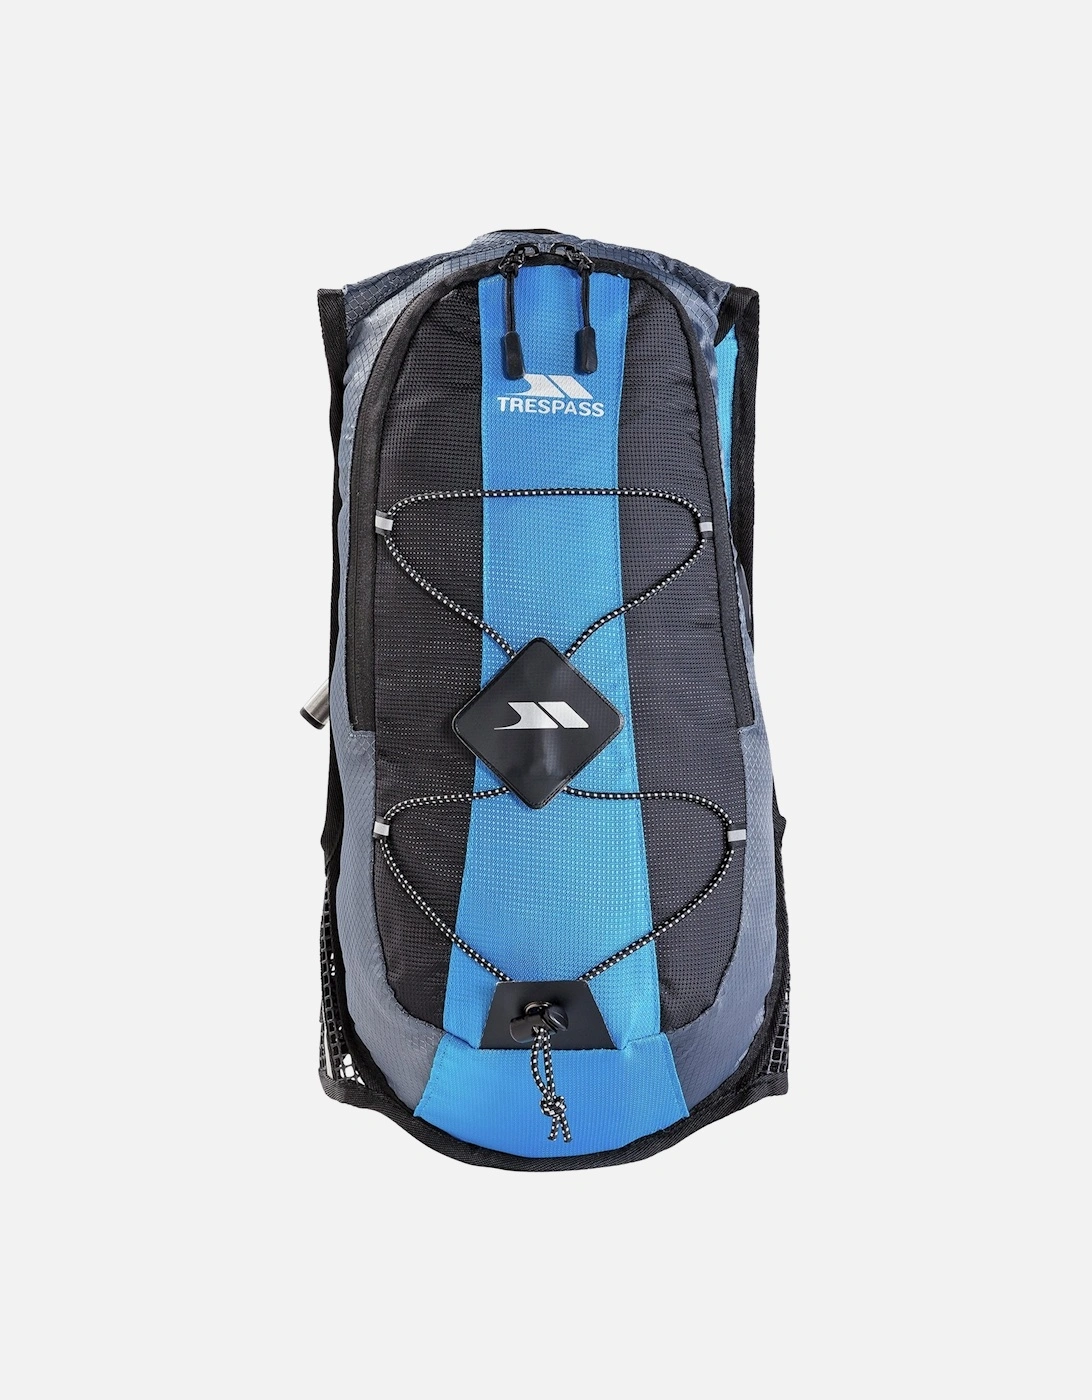 Mirror Hydration Backpack/Rucksack (15 Litres) With Water Resevoir (2 Litres)